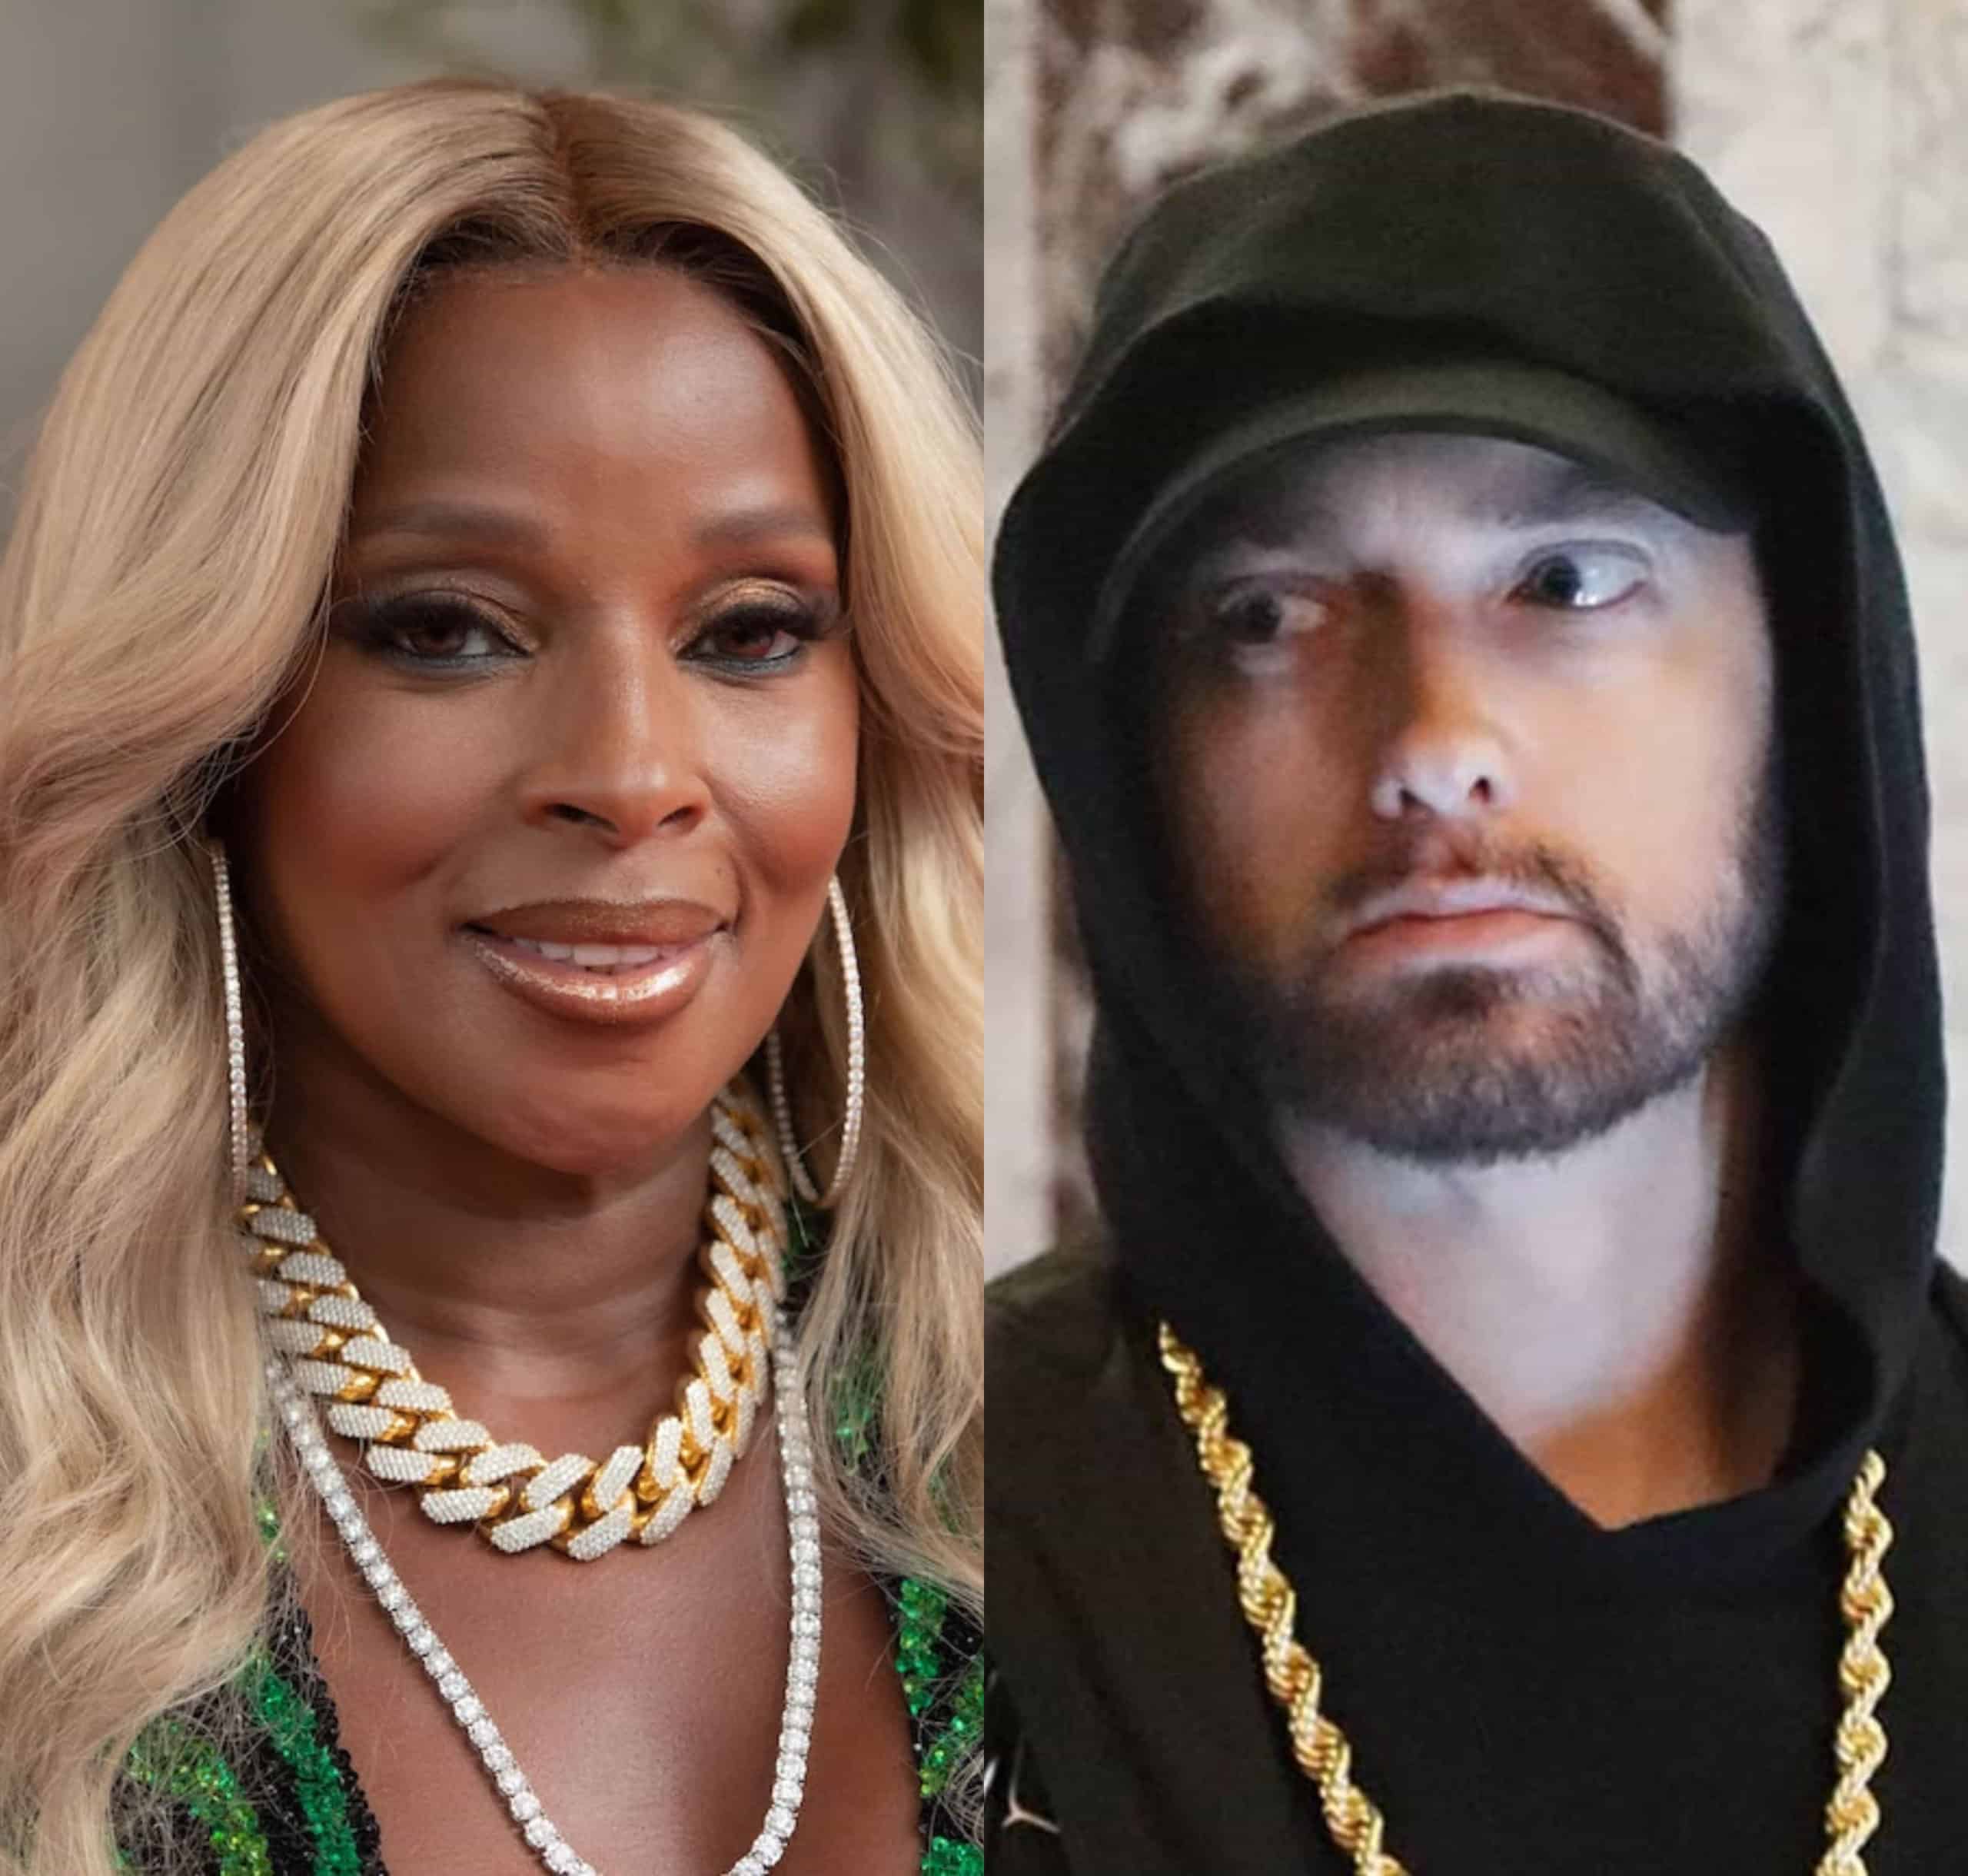 Mary J. Blige Quotes Eminem In Response To Not Getting Paid For Super Bowl Show